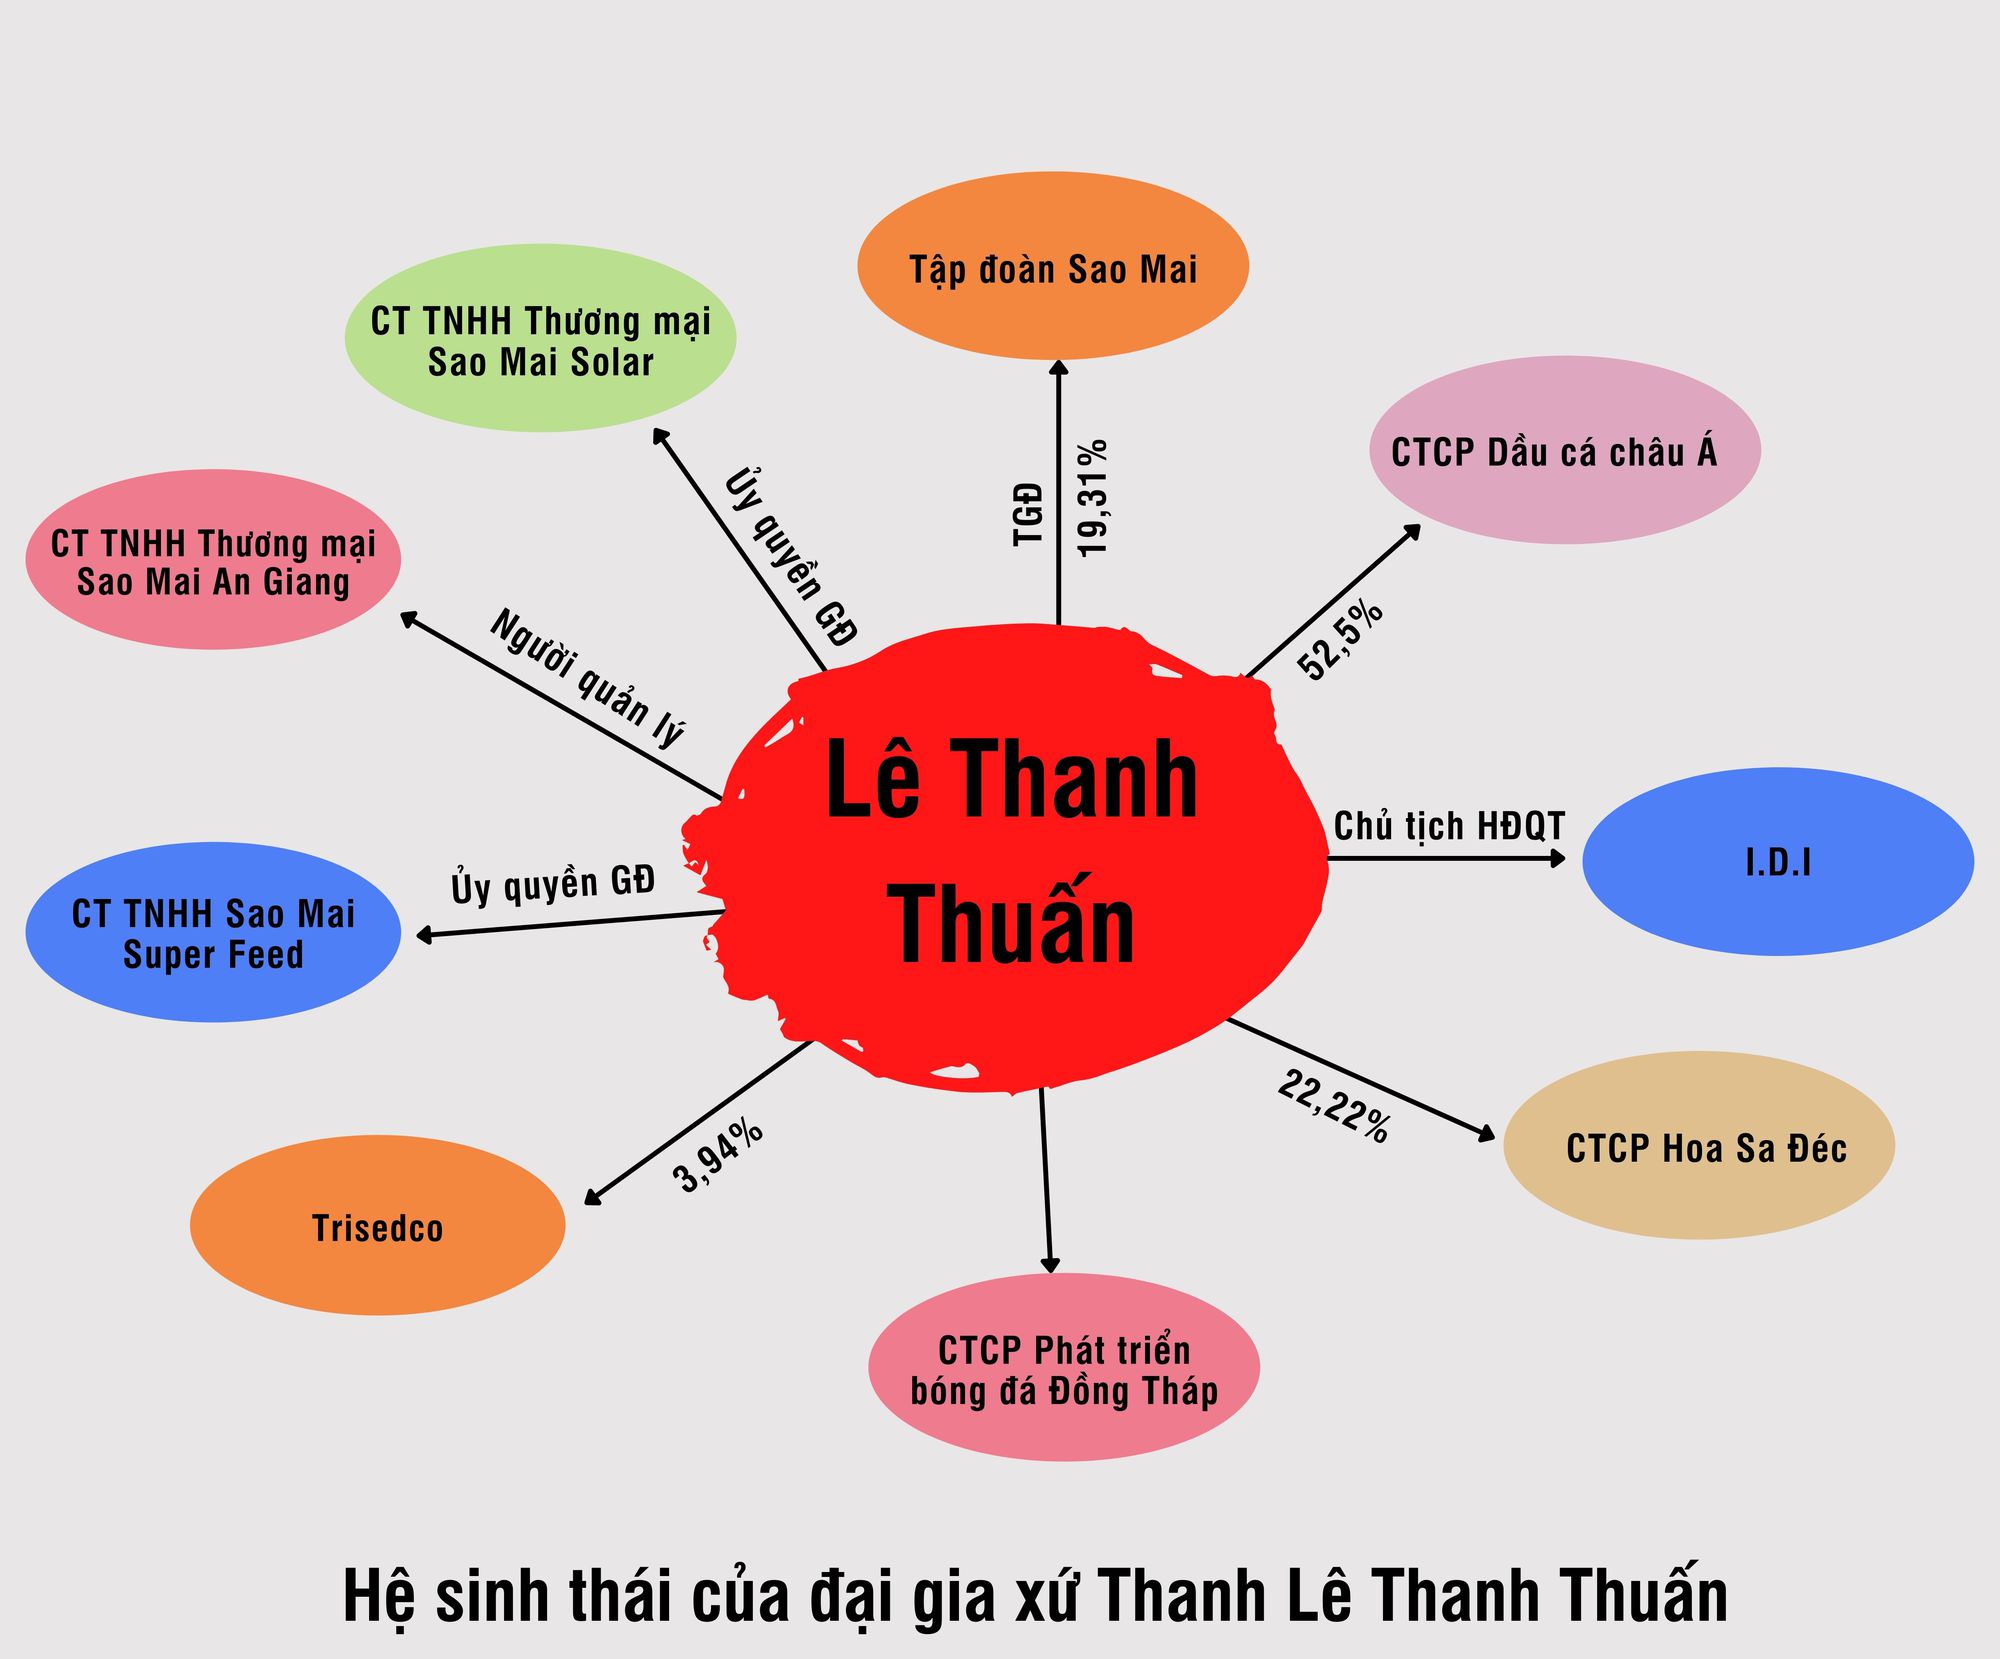 Revealing the huge assets of Sao Mai Group Chairman Le Thanh Thuan - Photo 4.